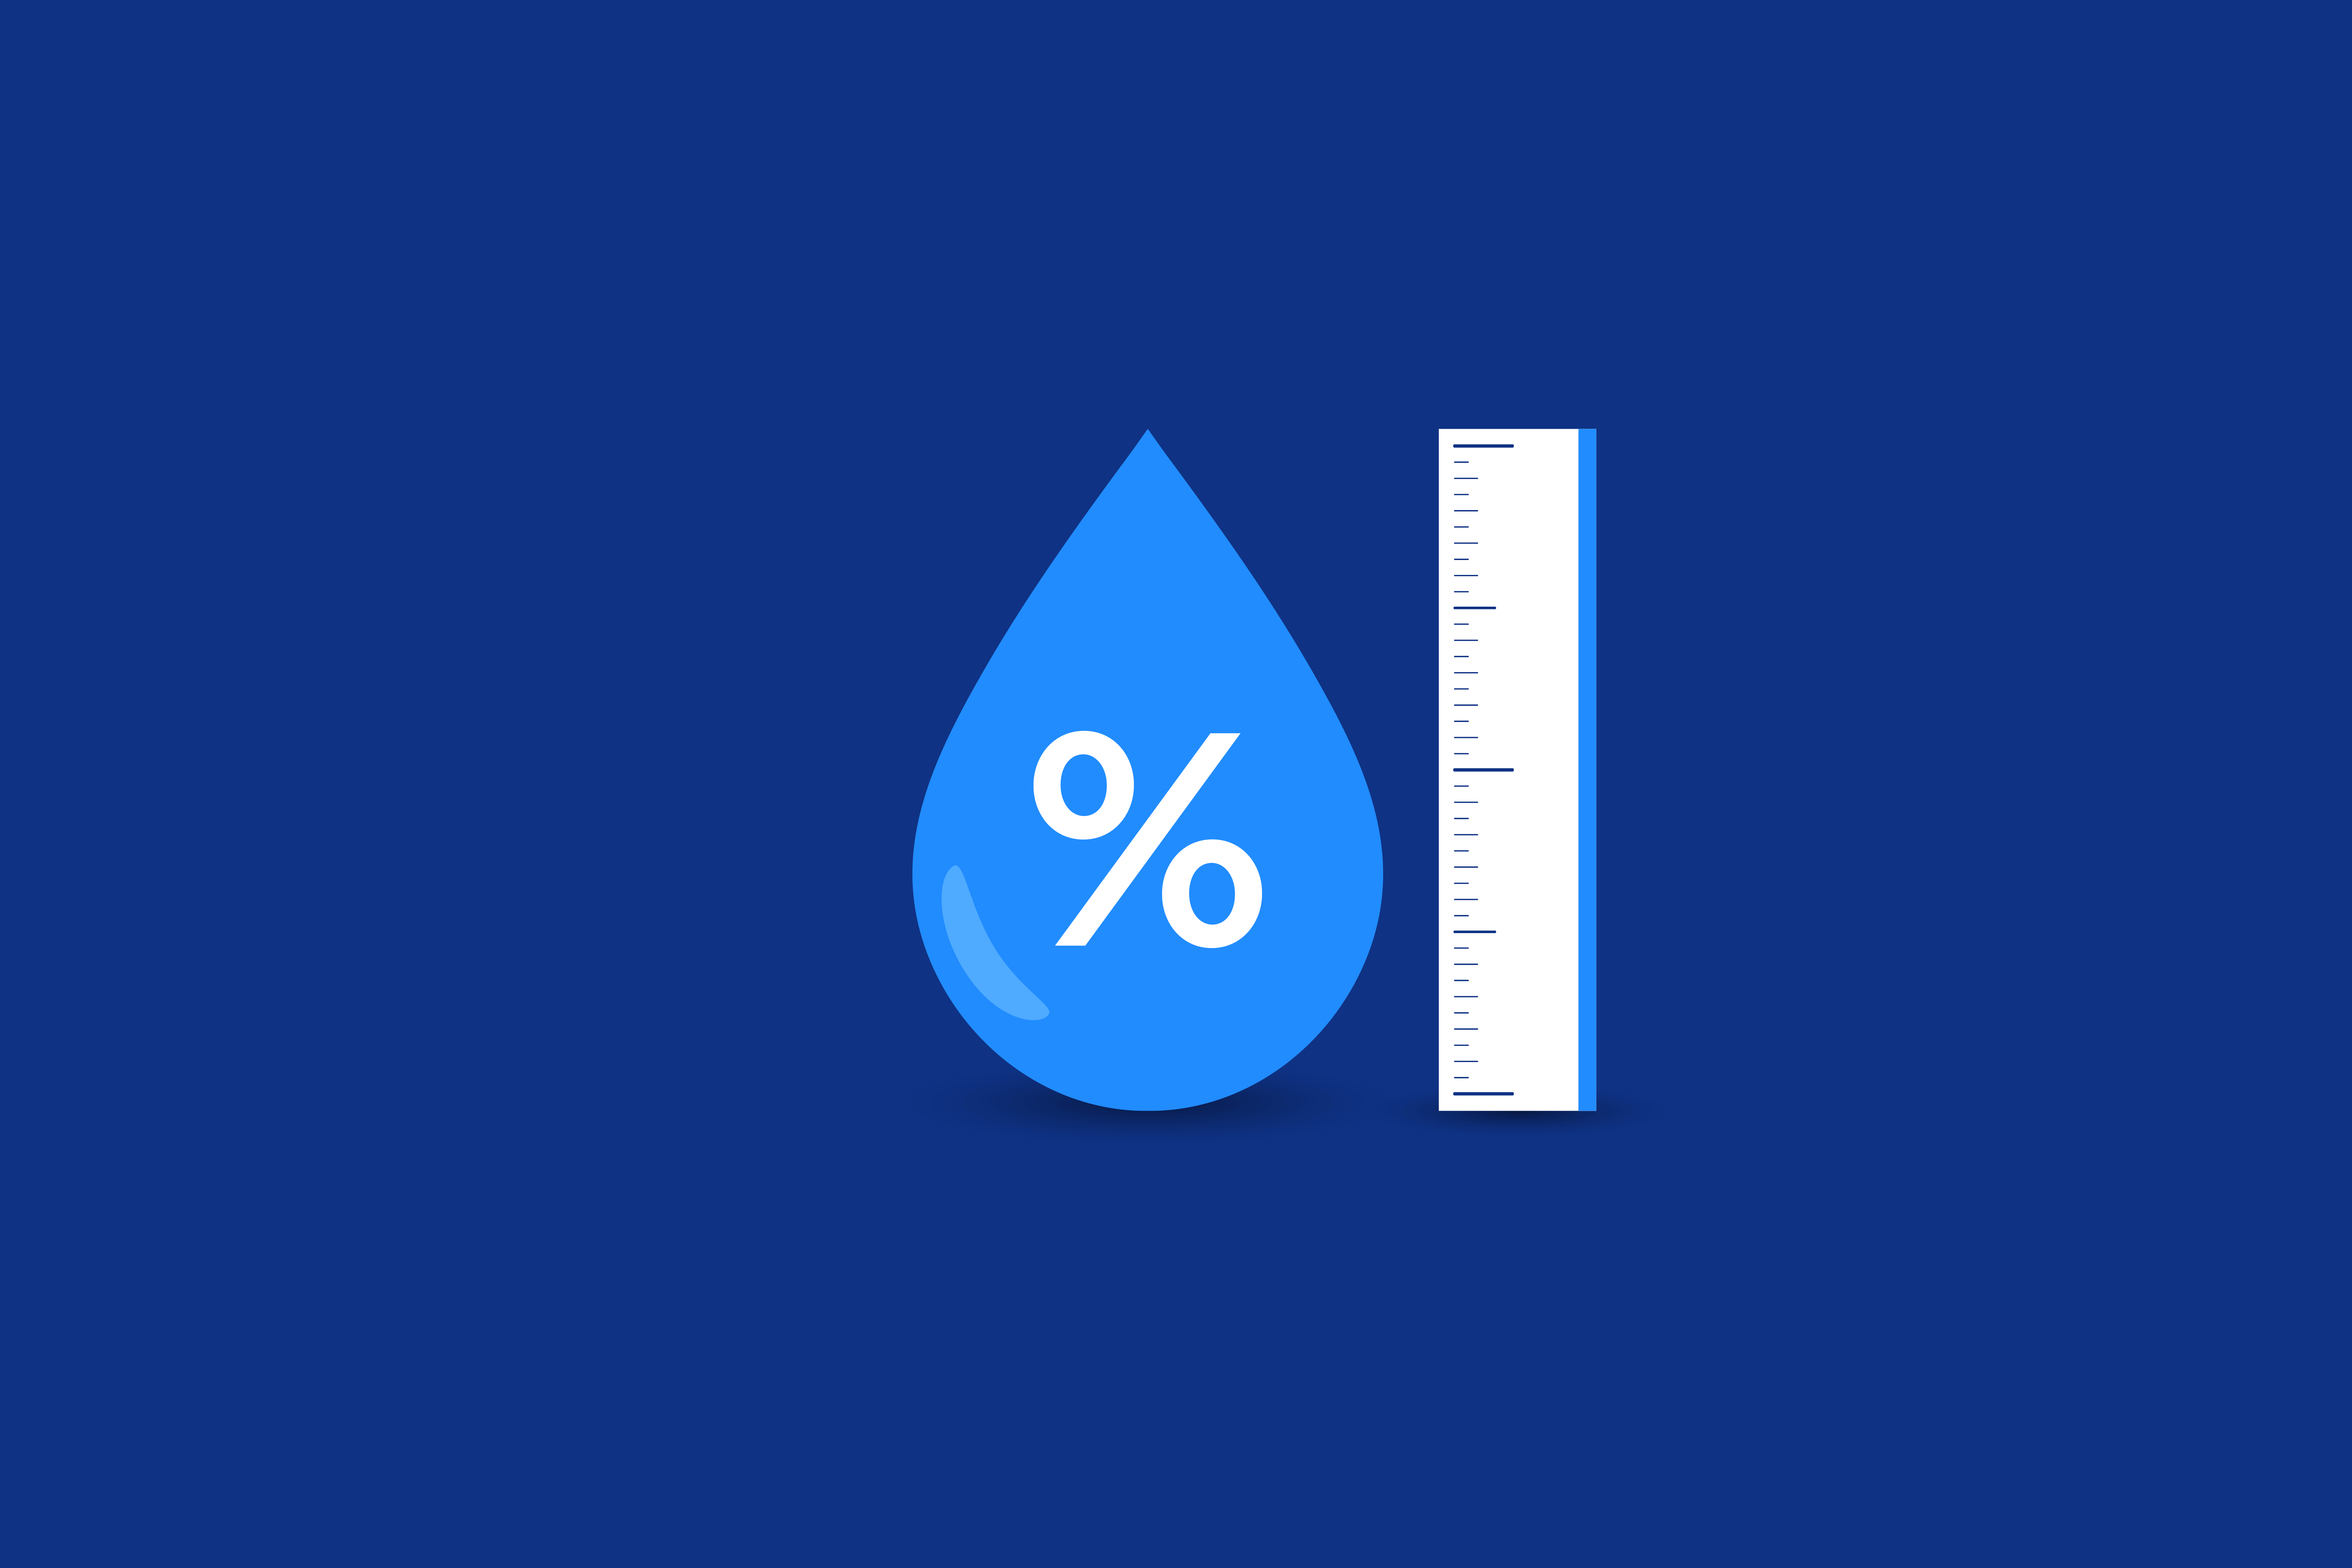 Water tank and humidity level - Decreasing at a slow rate